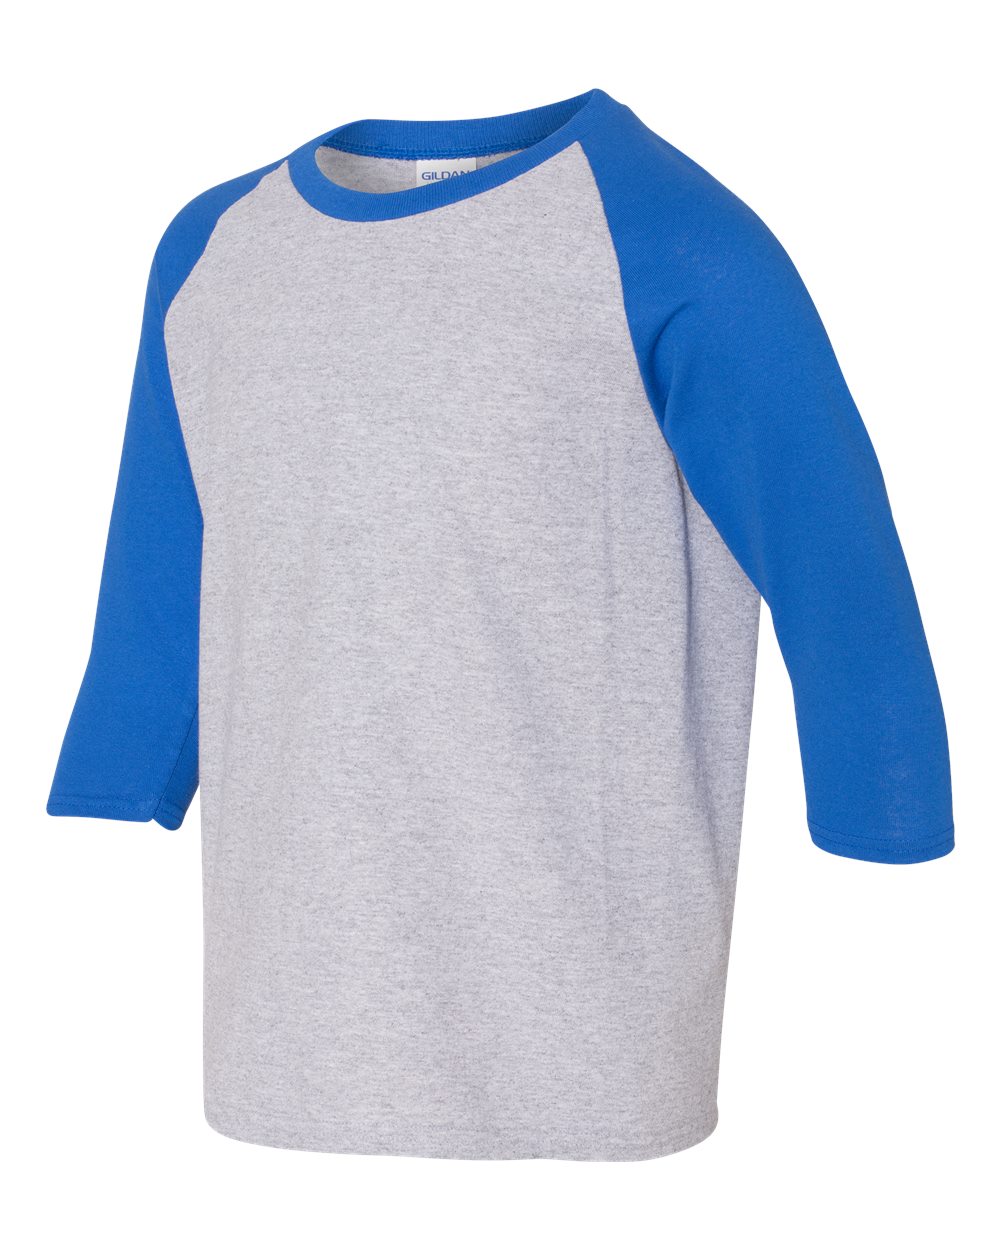 click to view Sport Grey/ Royal